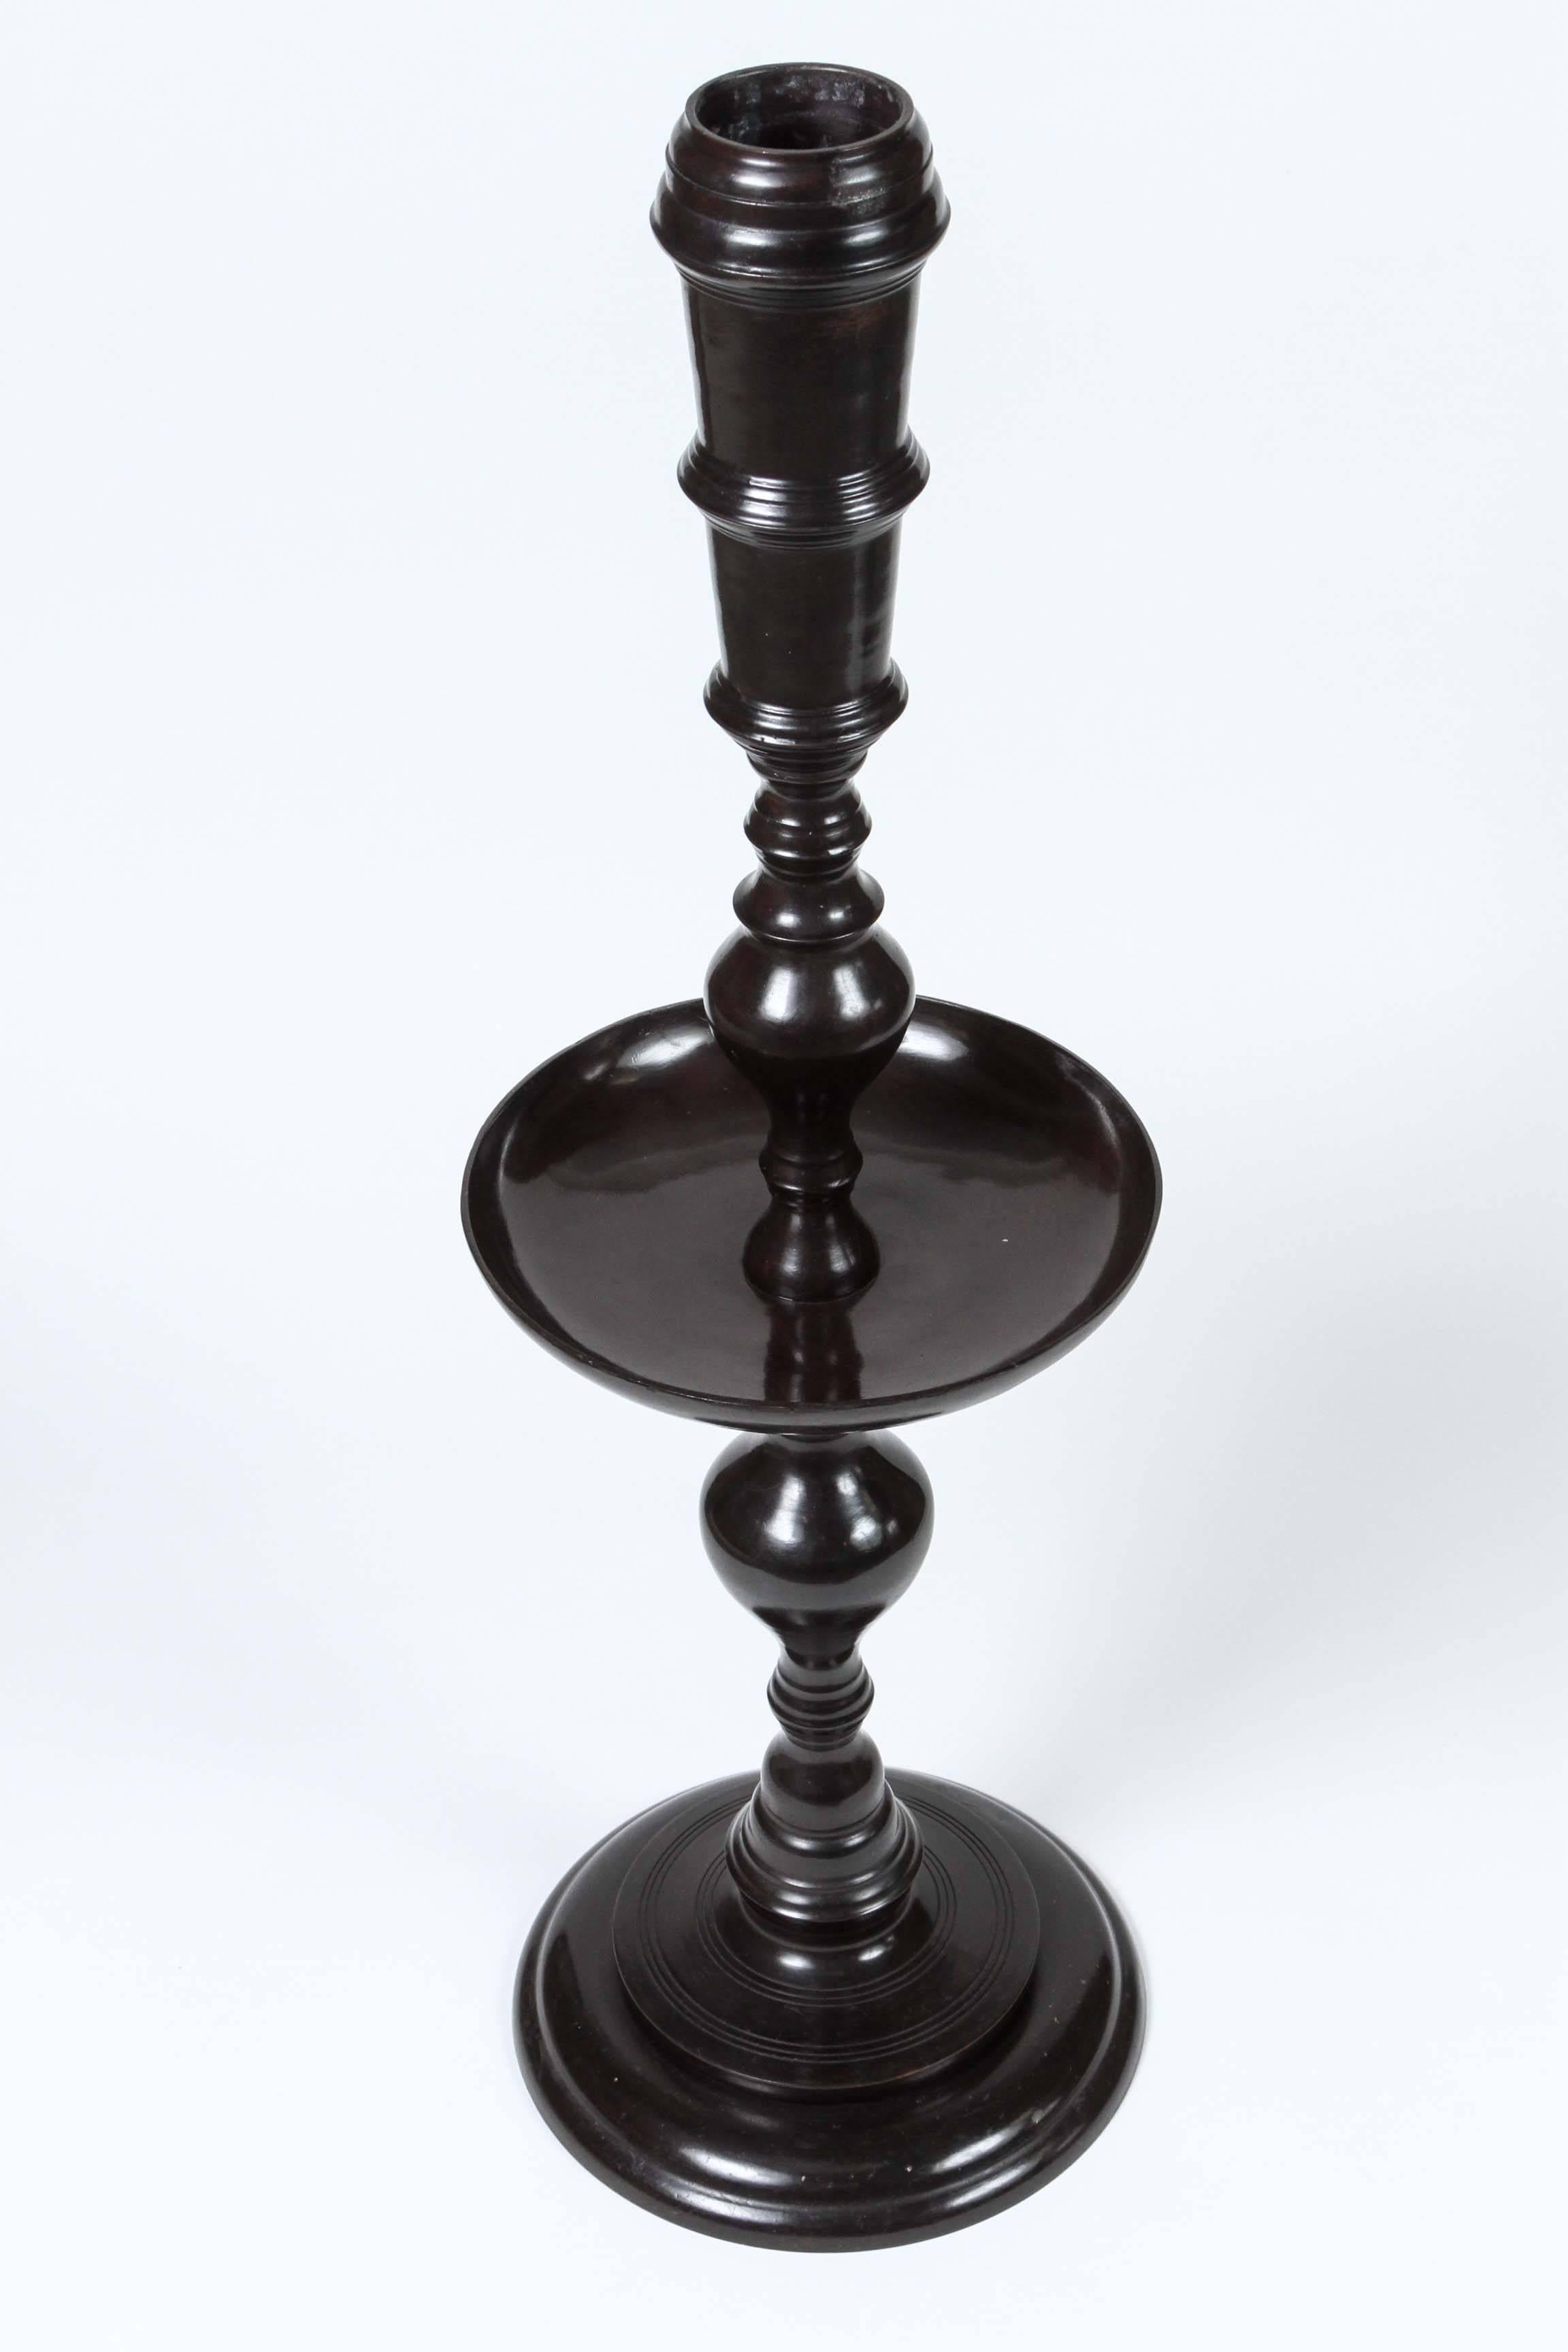 Pair of large vintage Moroccan black metal candle stands by Maitland-Smith.
Nice polished black metal candle sticks in Moroccan Moorish style.
Great elegant Mid-Century Modern candle holders centerpieces.
Handmade in Thailand, deigned by Maitland